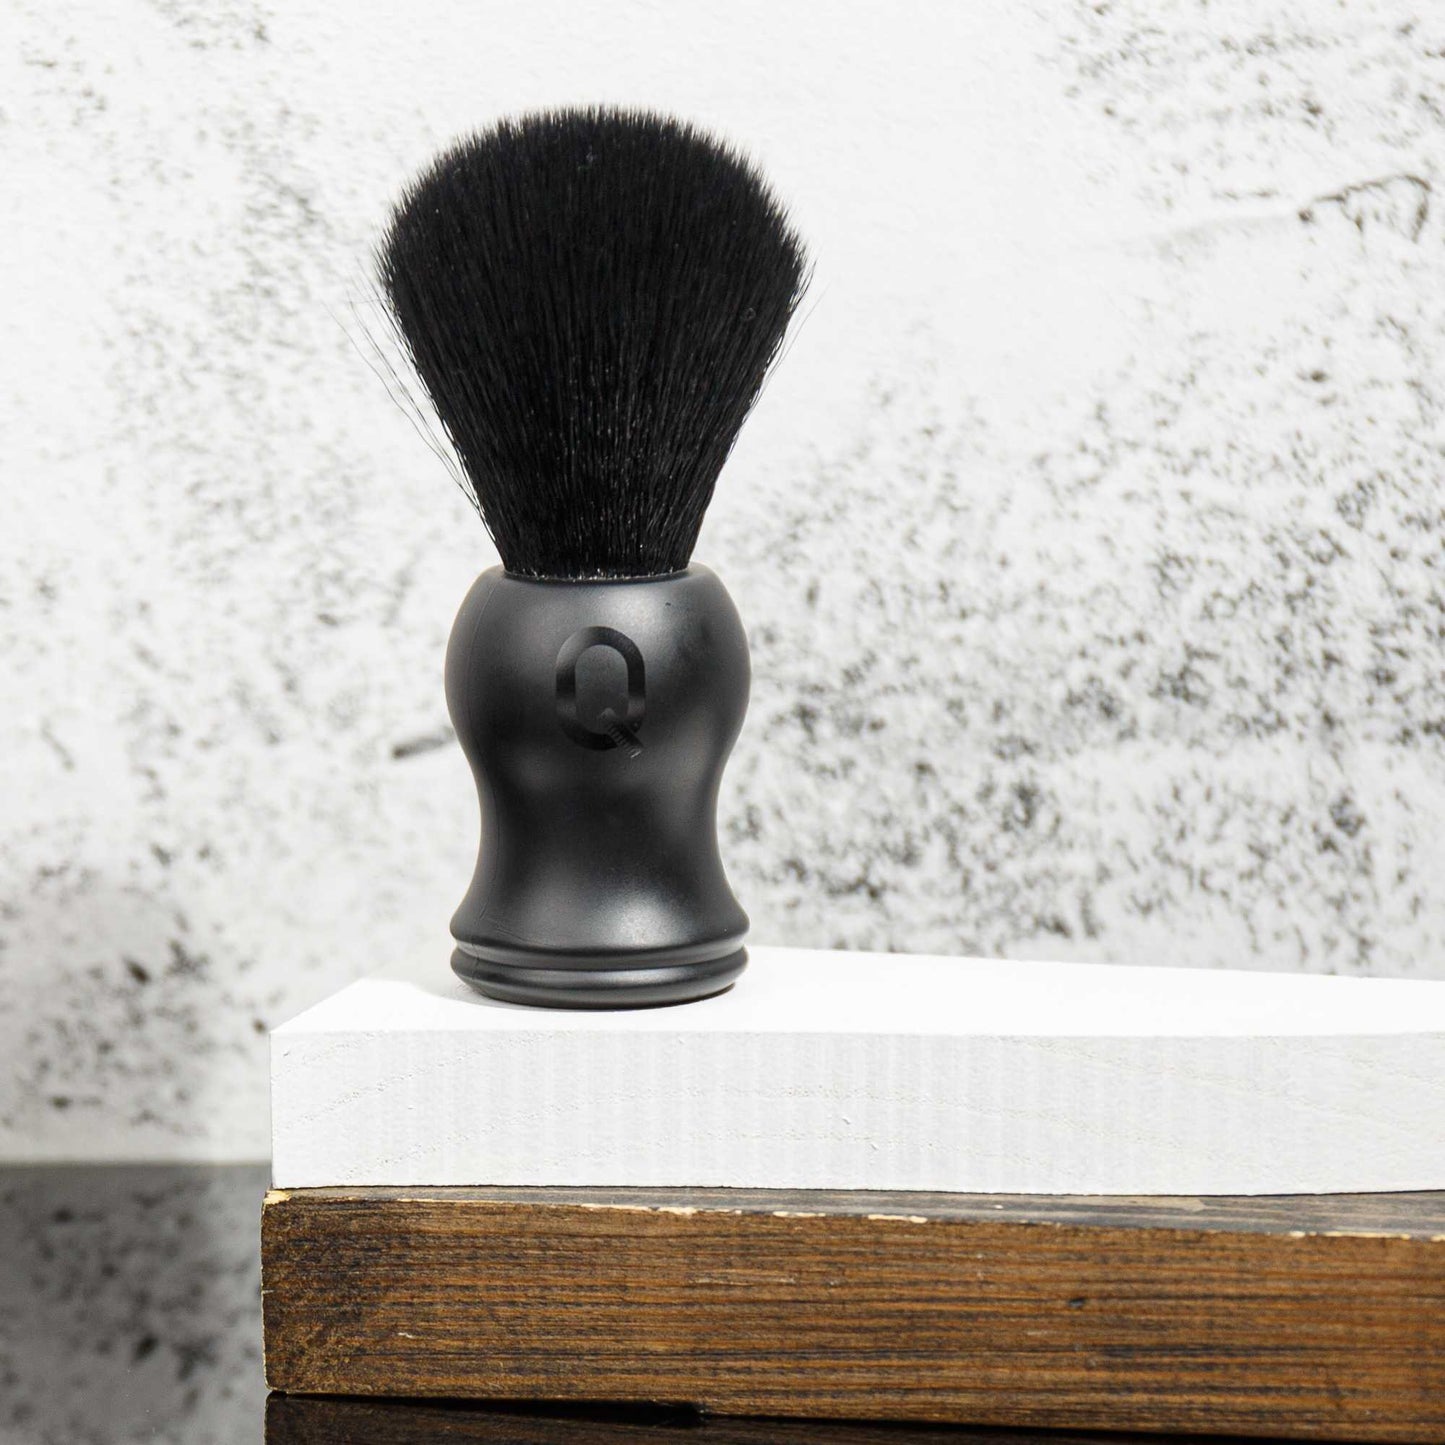 Q Brothers Shave Brush with Synthetic Fibers (Black)  #10085205